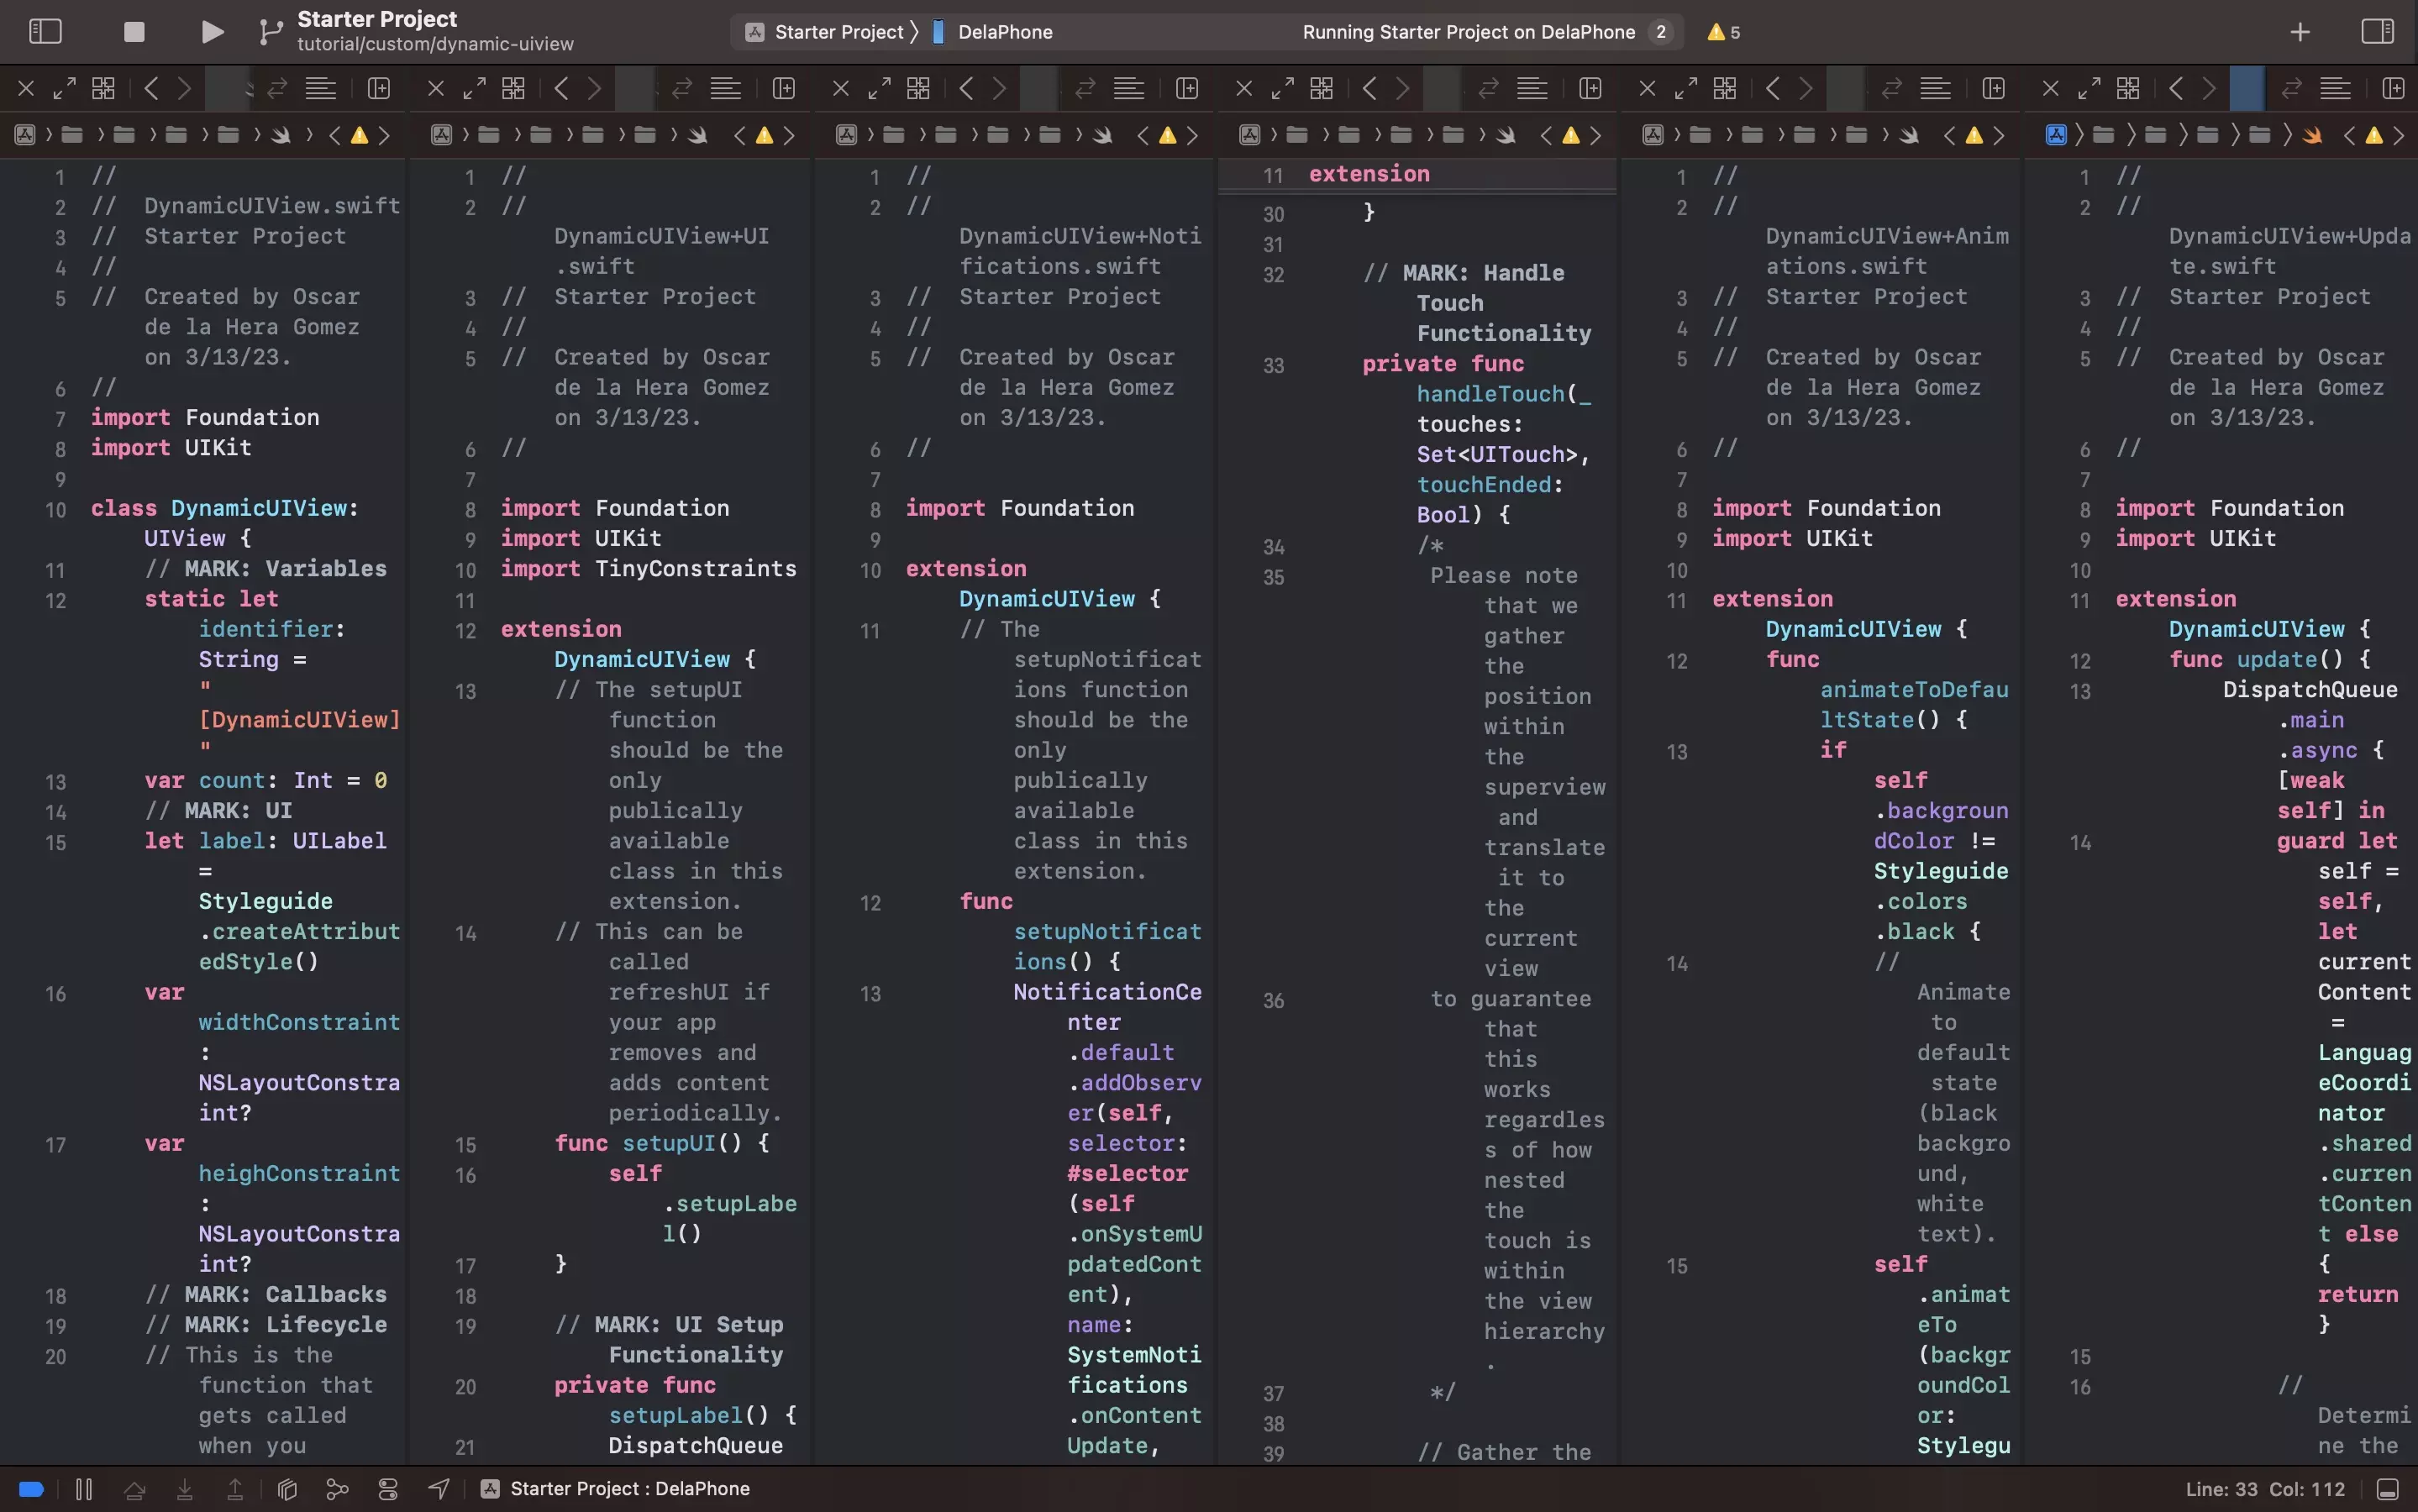 A screenshot of Xcode showing the 6 files that we create in this step side by side.